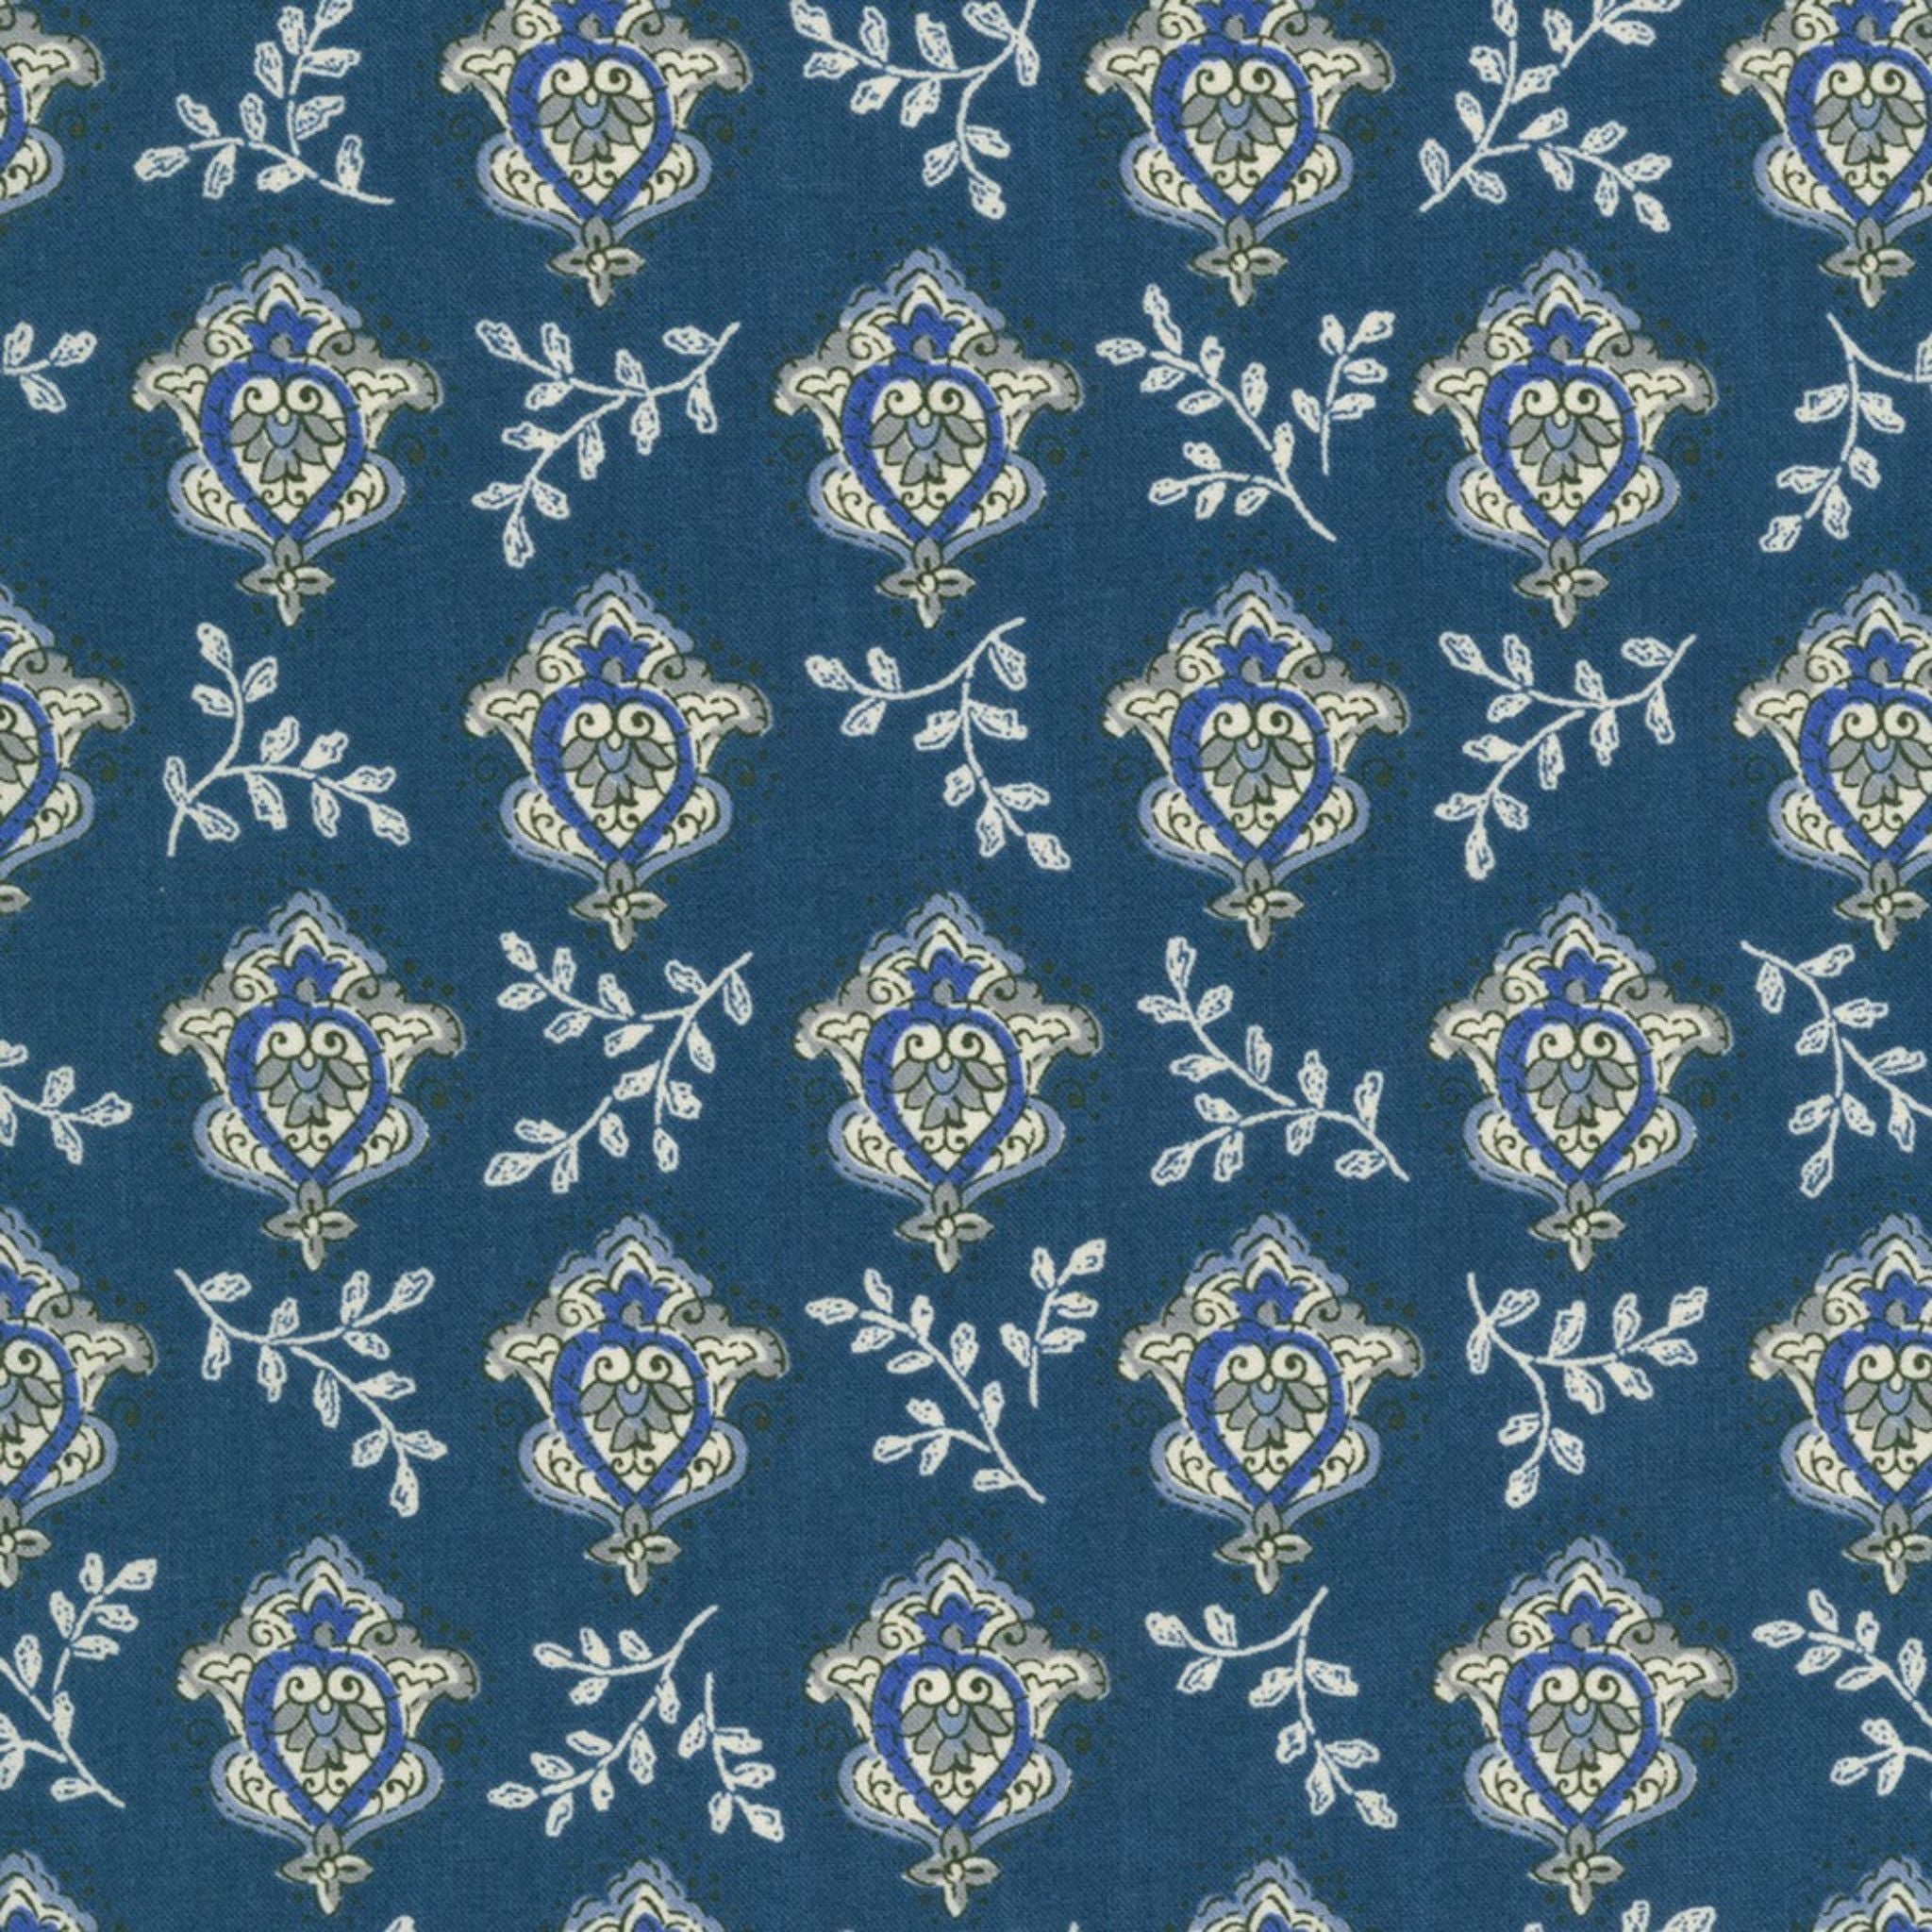 Navy cotton lawn with geometric shapes and leaves - Le Midi Lawn by Sevenberry